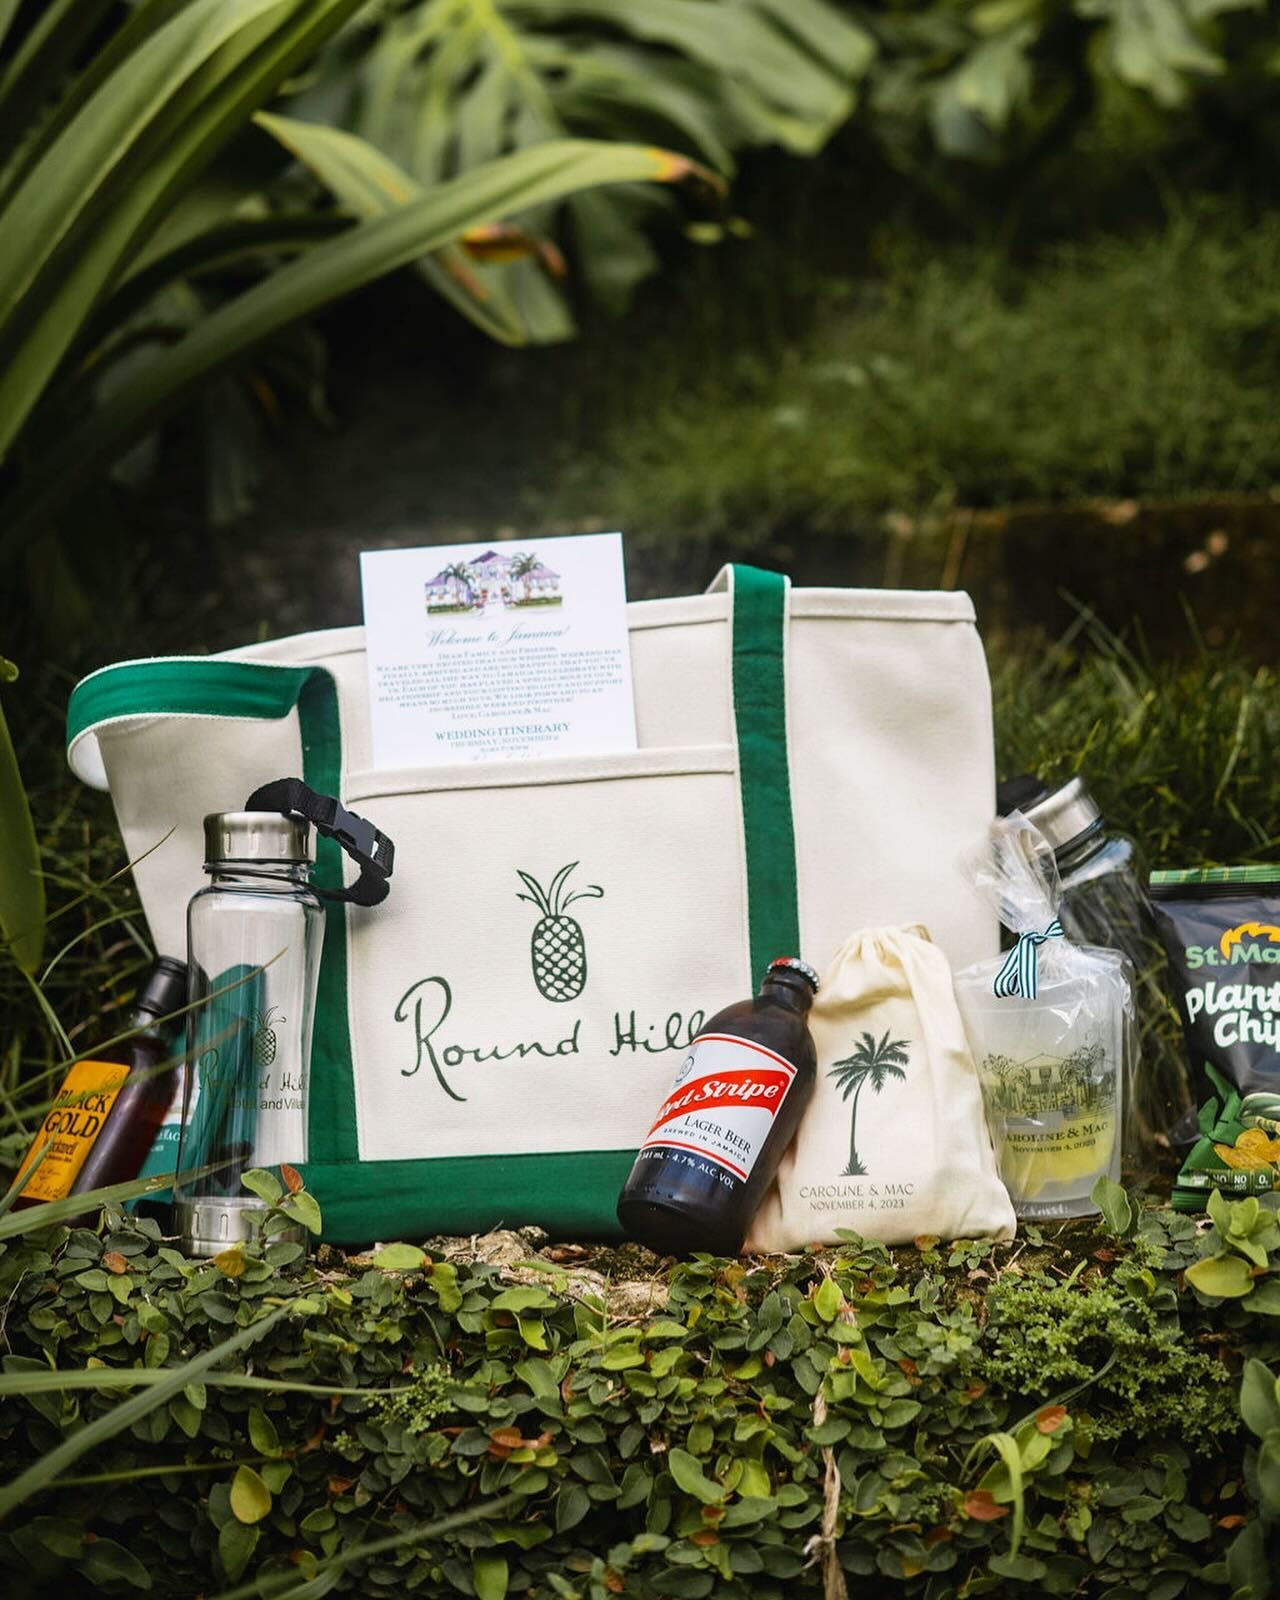 The perfect welcome bag for a destination wedding 🌴

#welcomebags #welcomebag #giftbag #roundhill #roundhillresort #jamaica #jamaicawedding #destinationwedding #wedding #weddingplanner #weddingvenue #weddingvenuedecor #wedddingideas #party #partypla